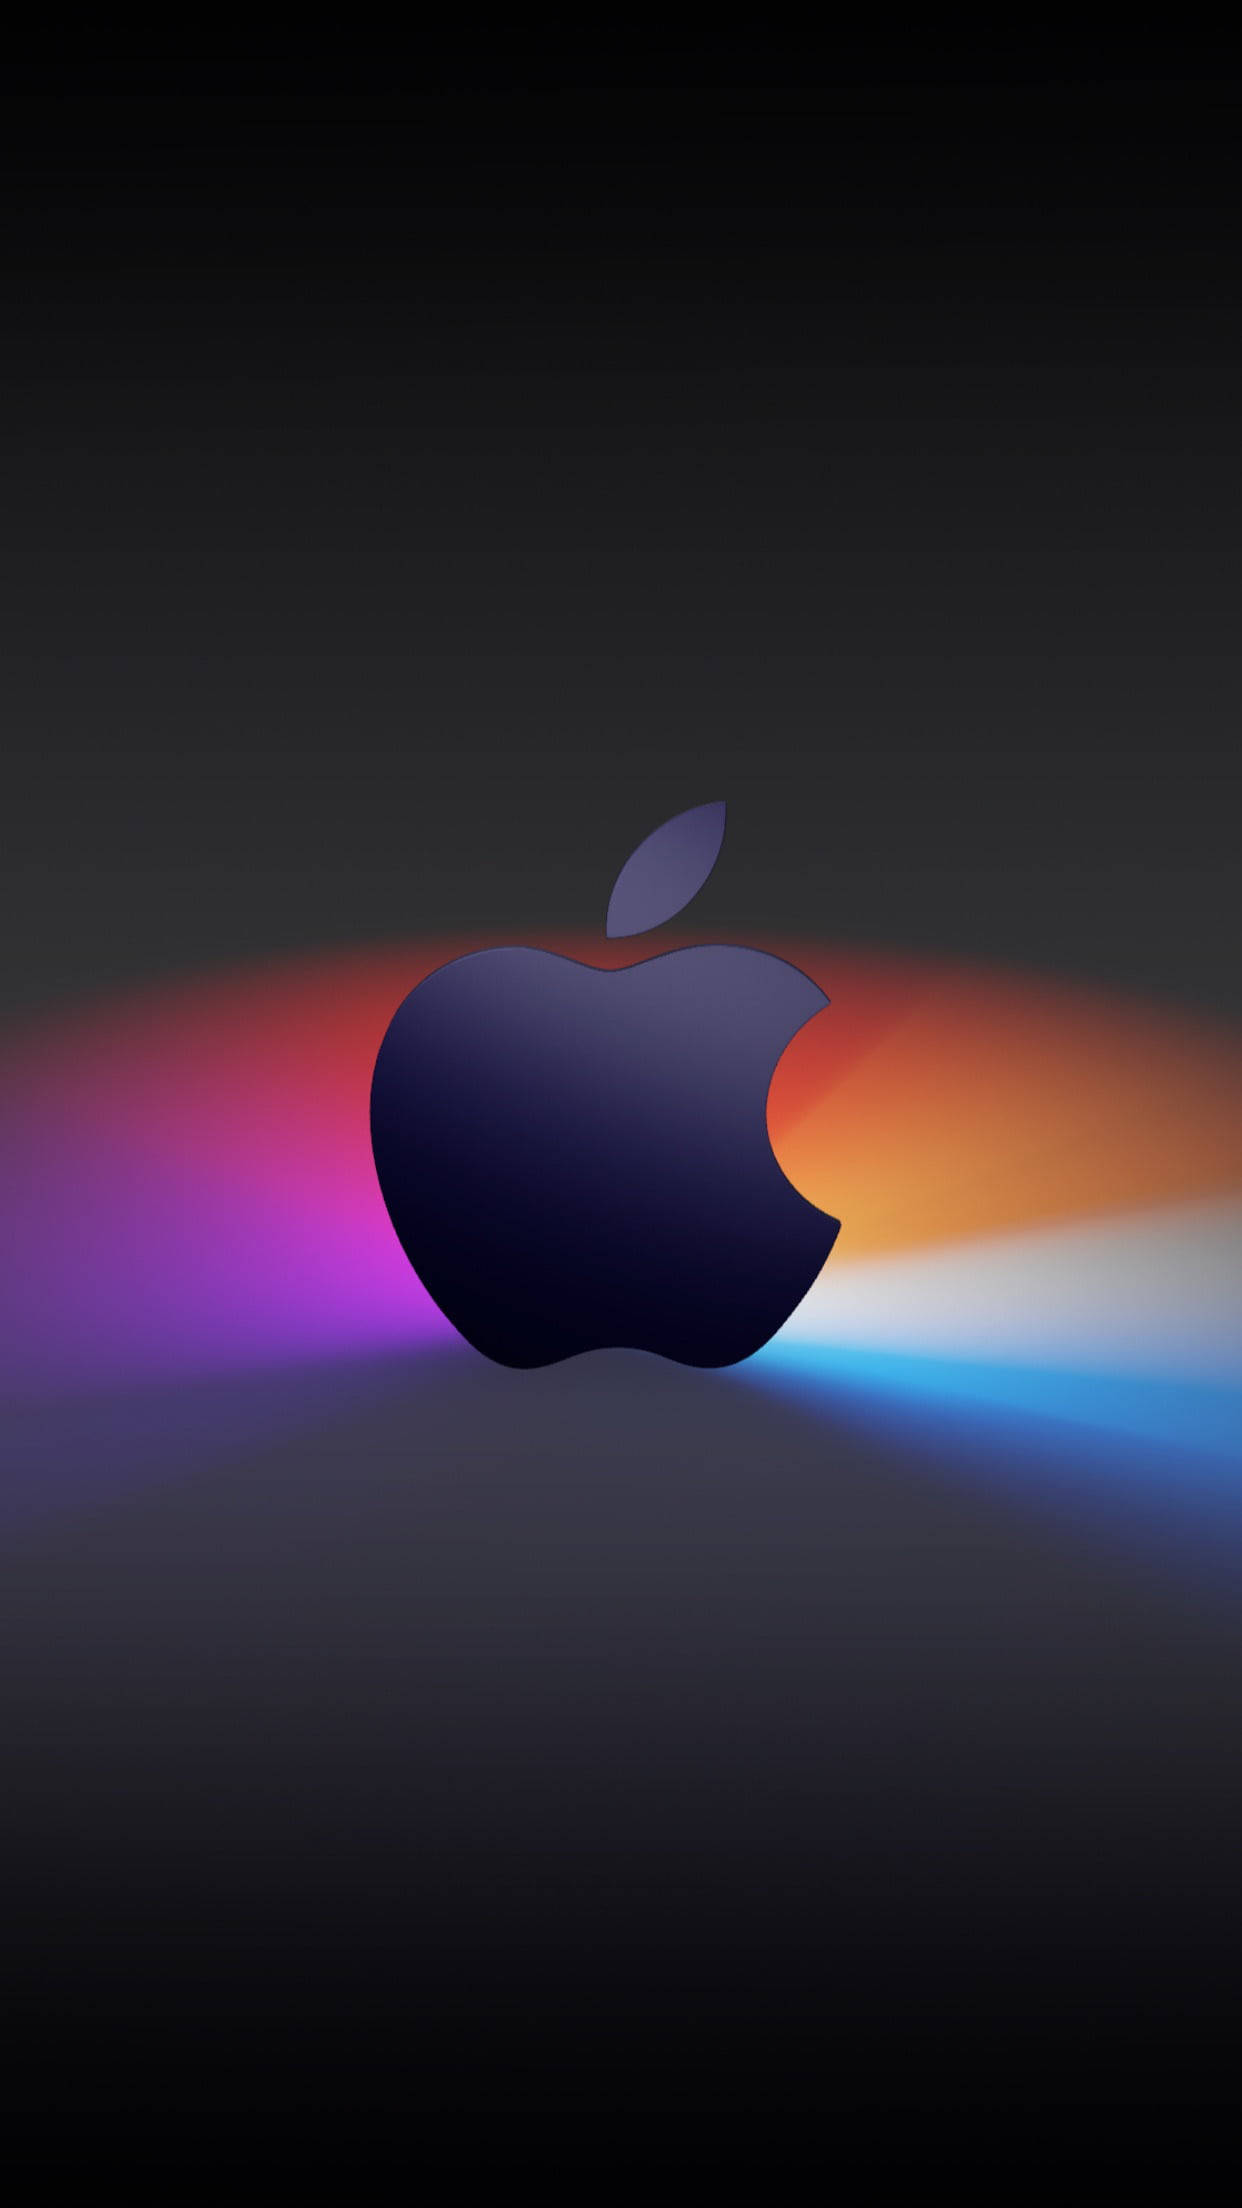 Download Full Hd Apple With Bright-colored Rays Wallpaper 